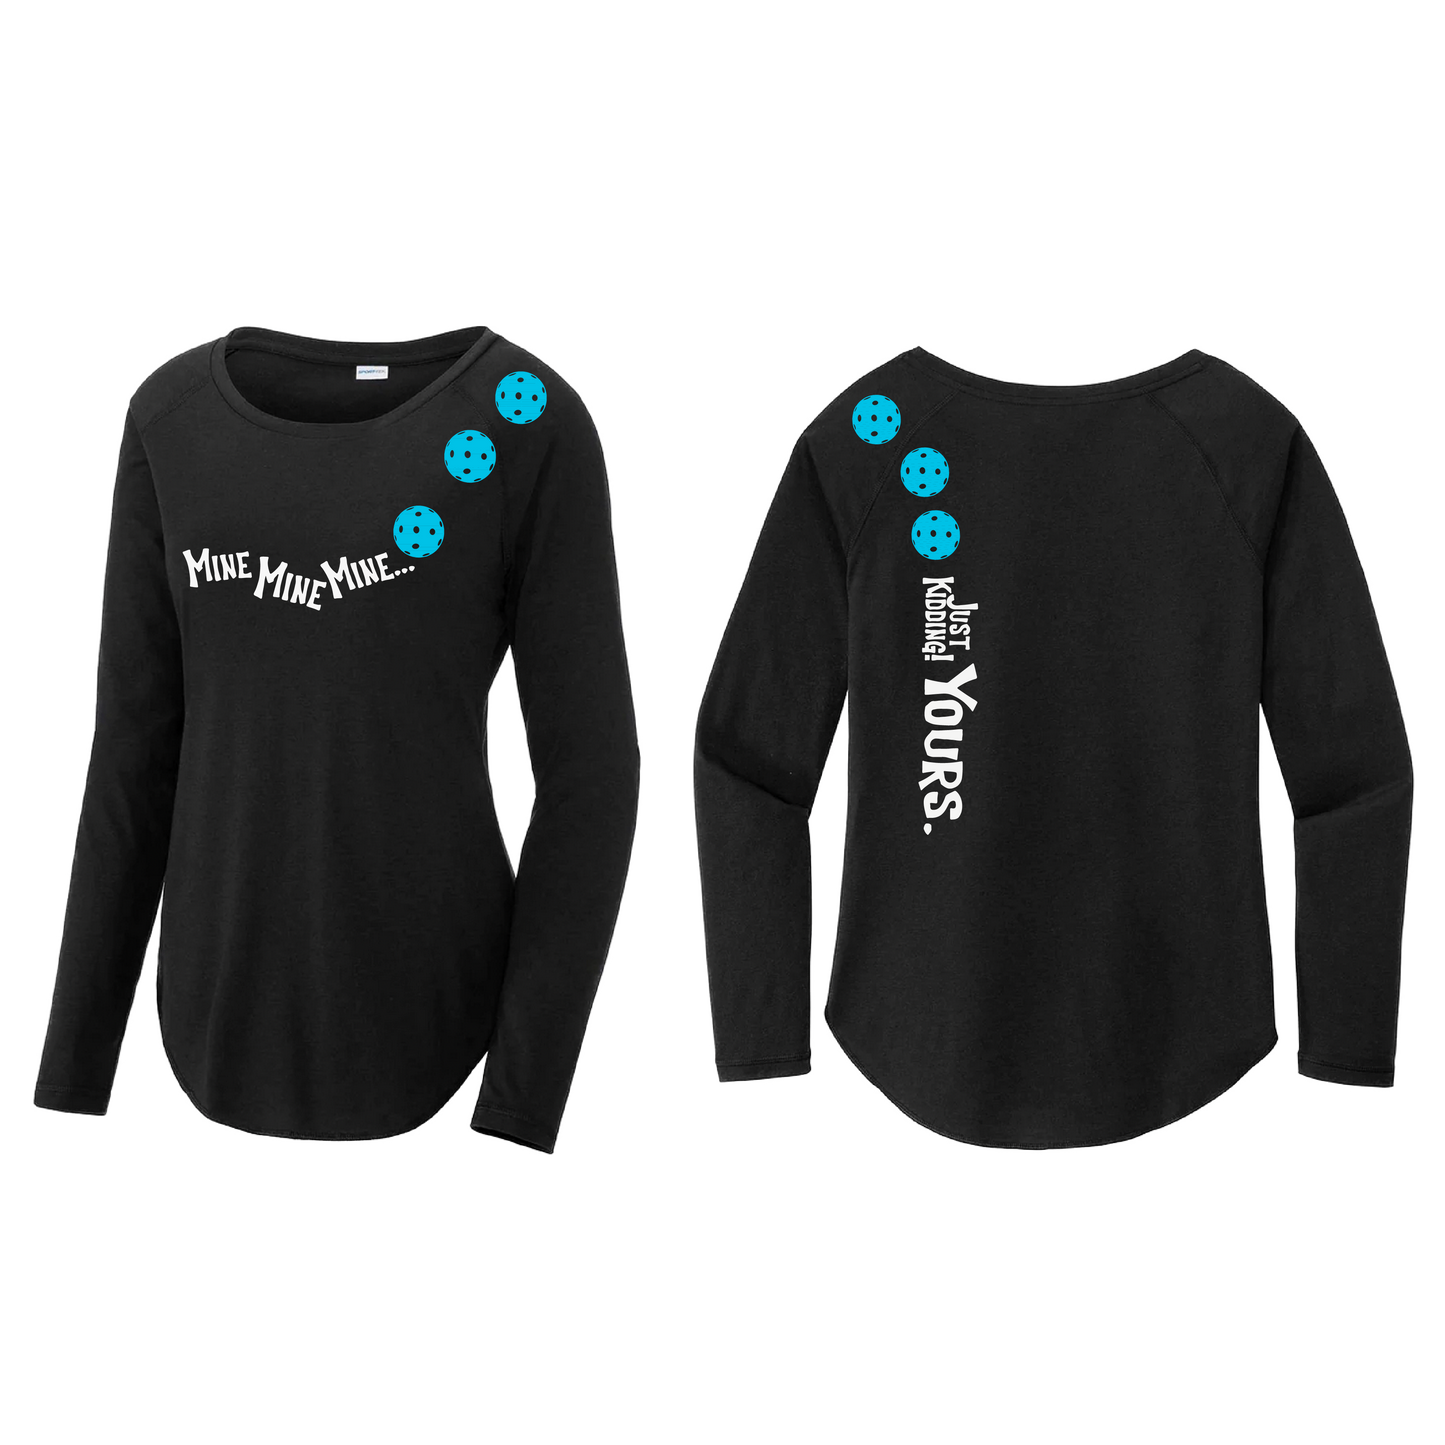 Mine JK Yours (Pickleball colors Green Rainbow Cyan or Pink)| Women's Long Sleeve Scoop Neck Pickleball Shirts | 75/13/12 poly/cotton/rayon